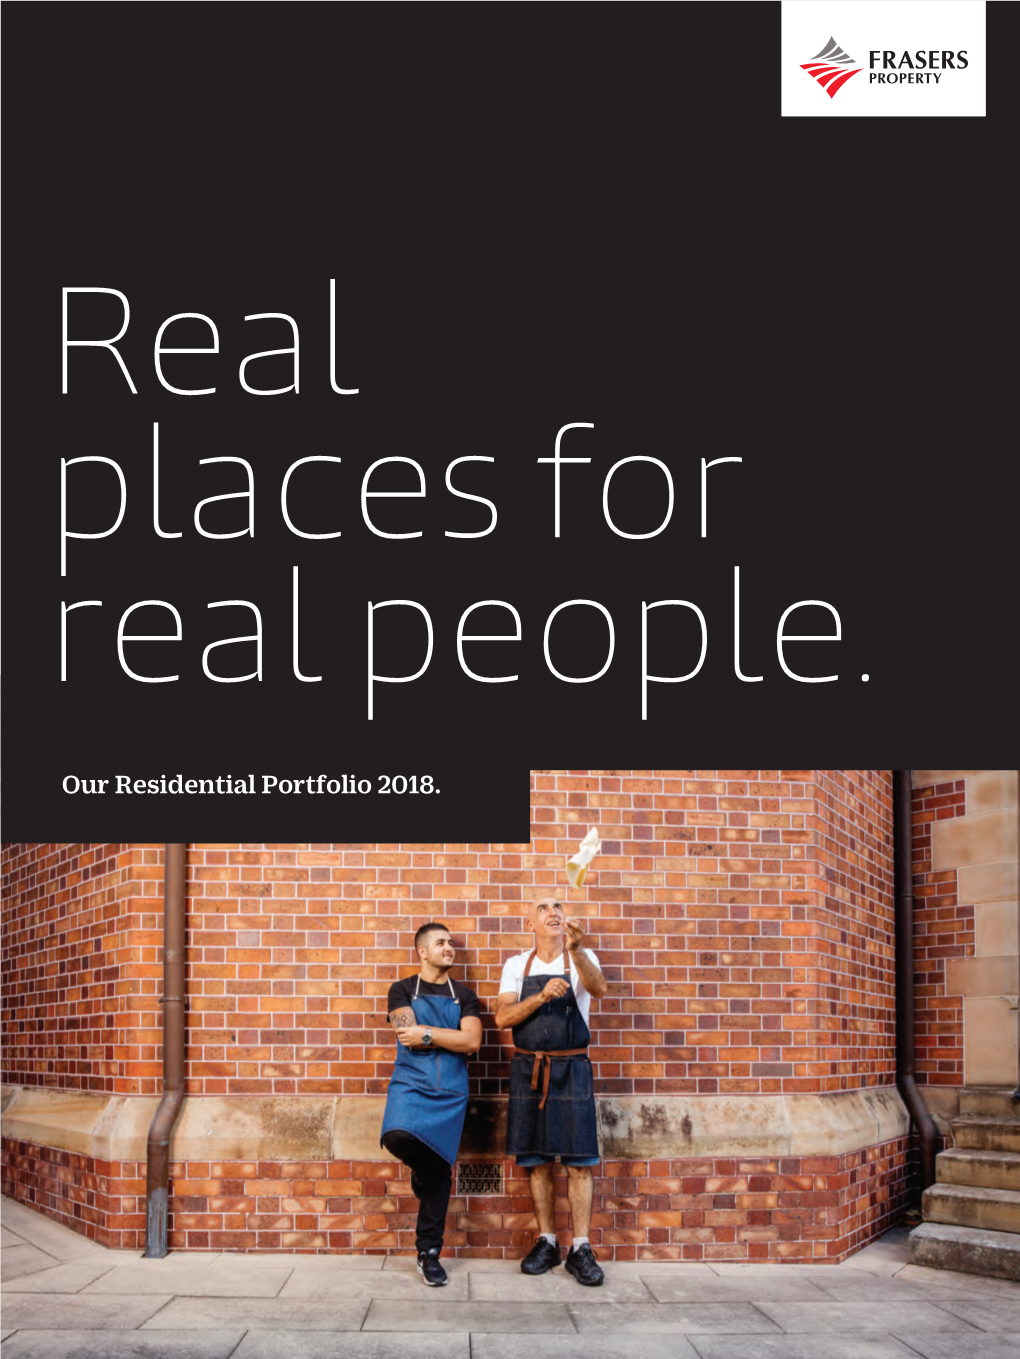 Our Residential Portfolio 2018. Who We Are